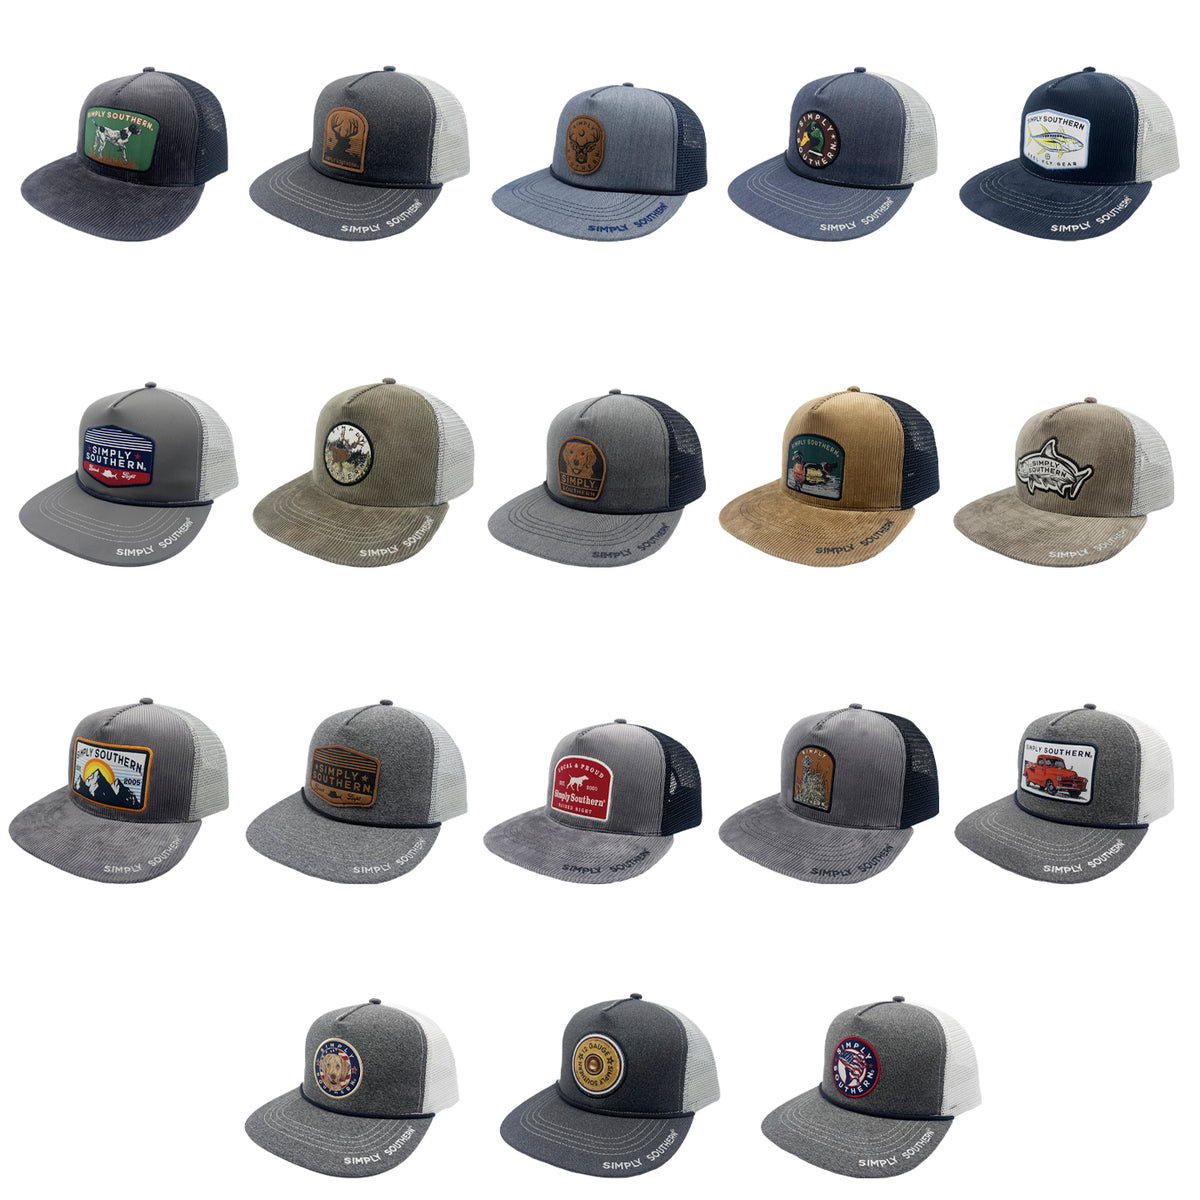 Simply Southern Hats 2024